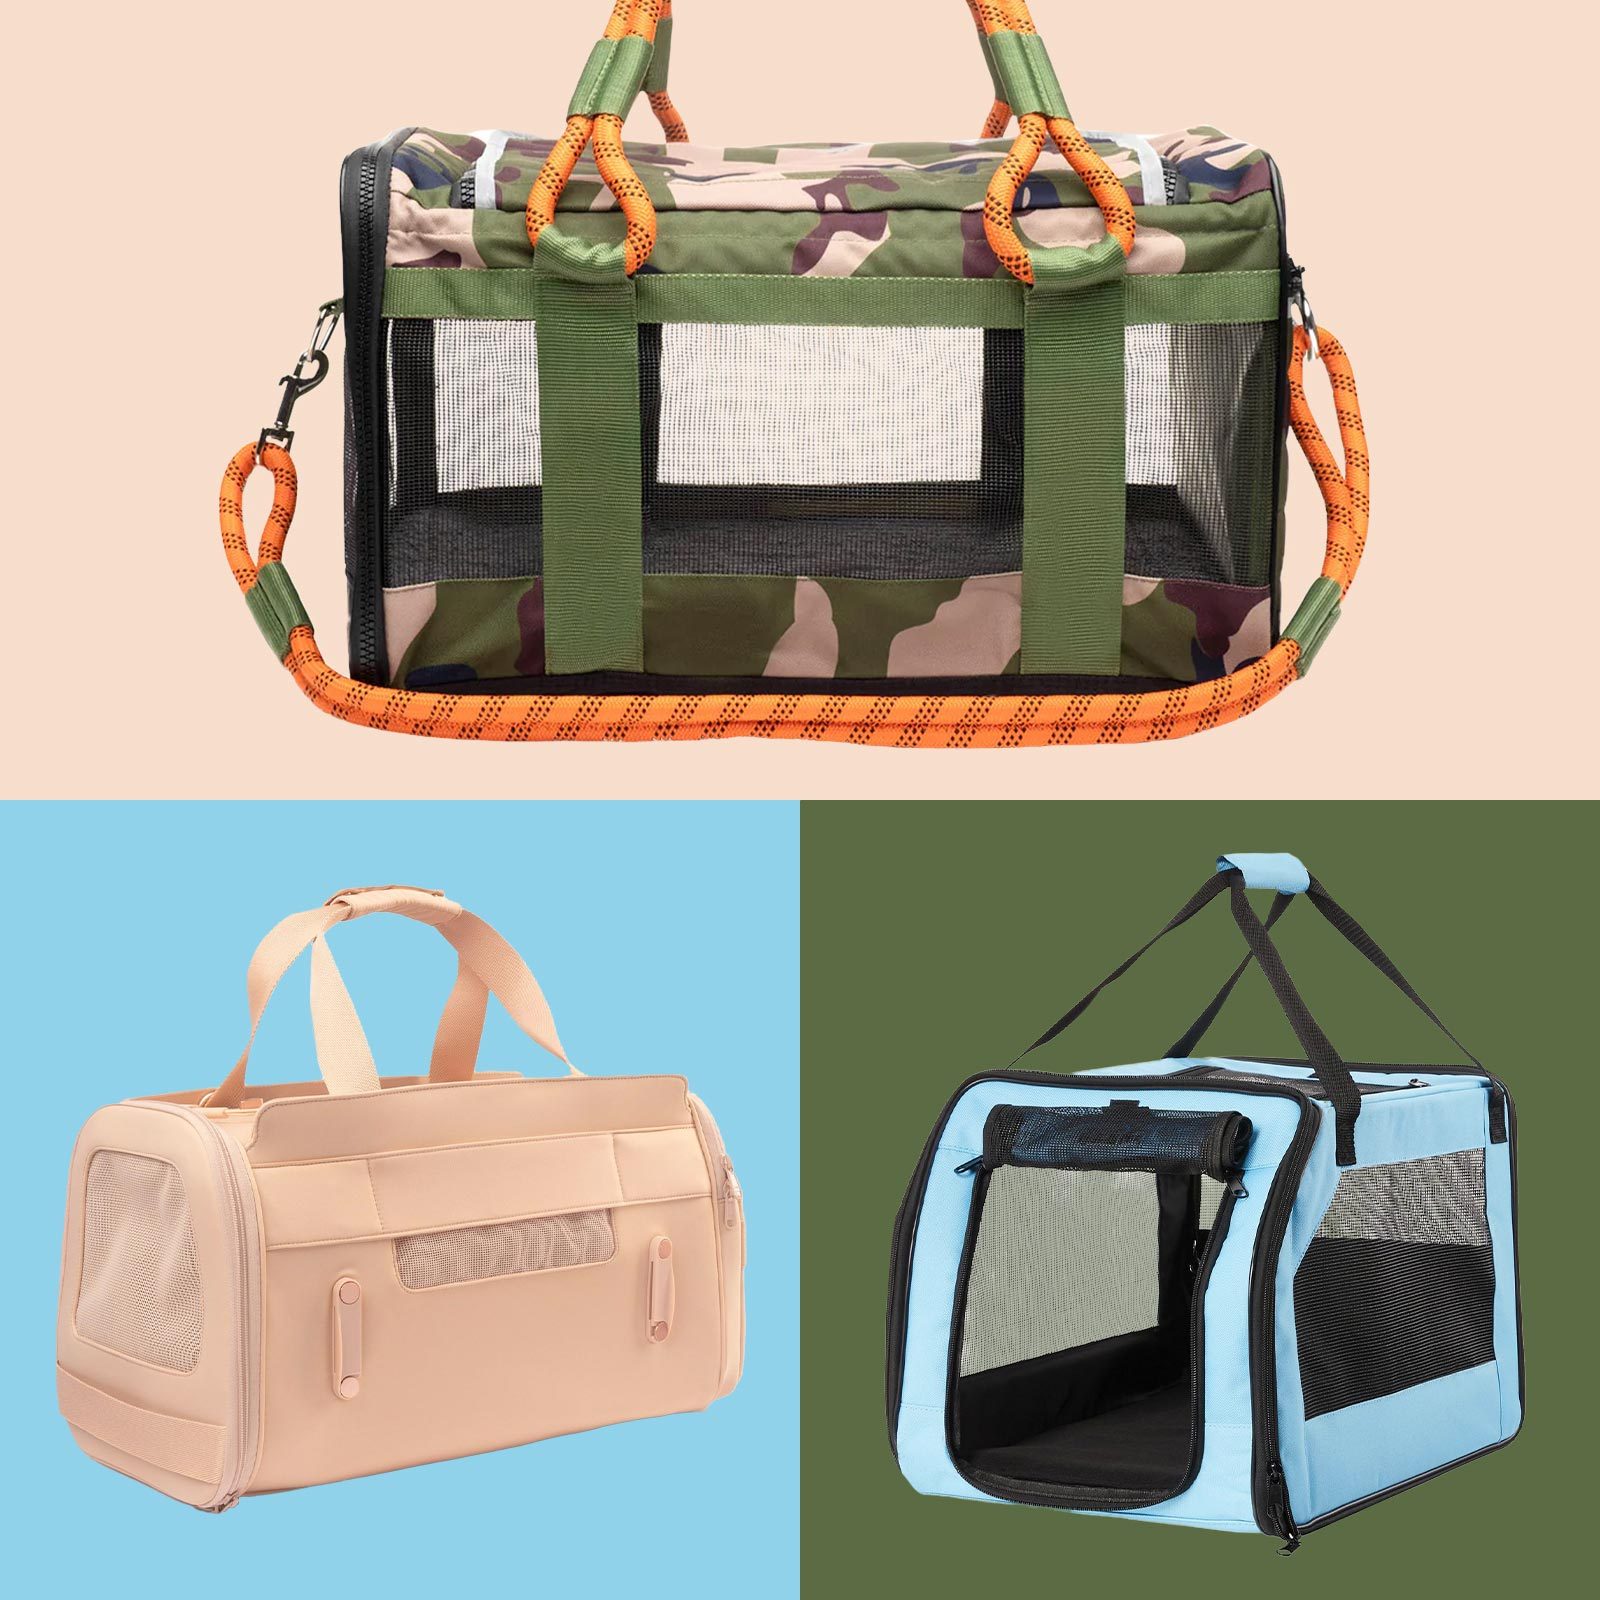 https://www.rd.com/wp-content/uploads/2022/08/RD-ecomm-8-Best-Dog-Carriers-for-Your-Next-Trip-via-merchant-3.jpg?fit=700%2C700